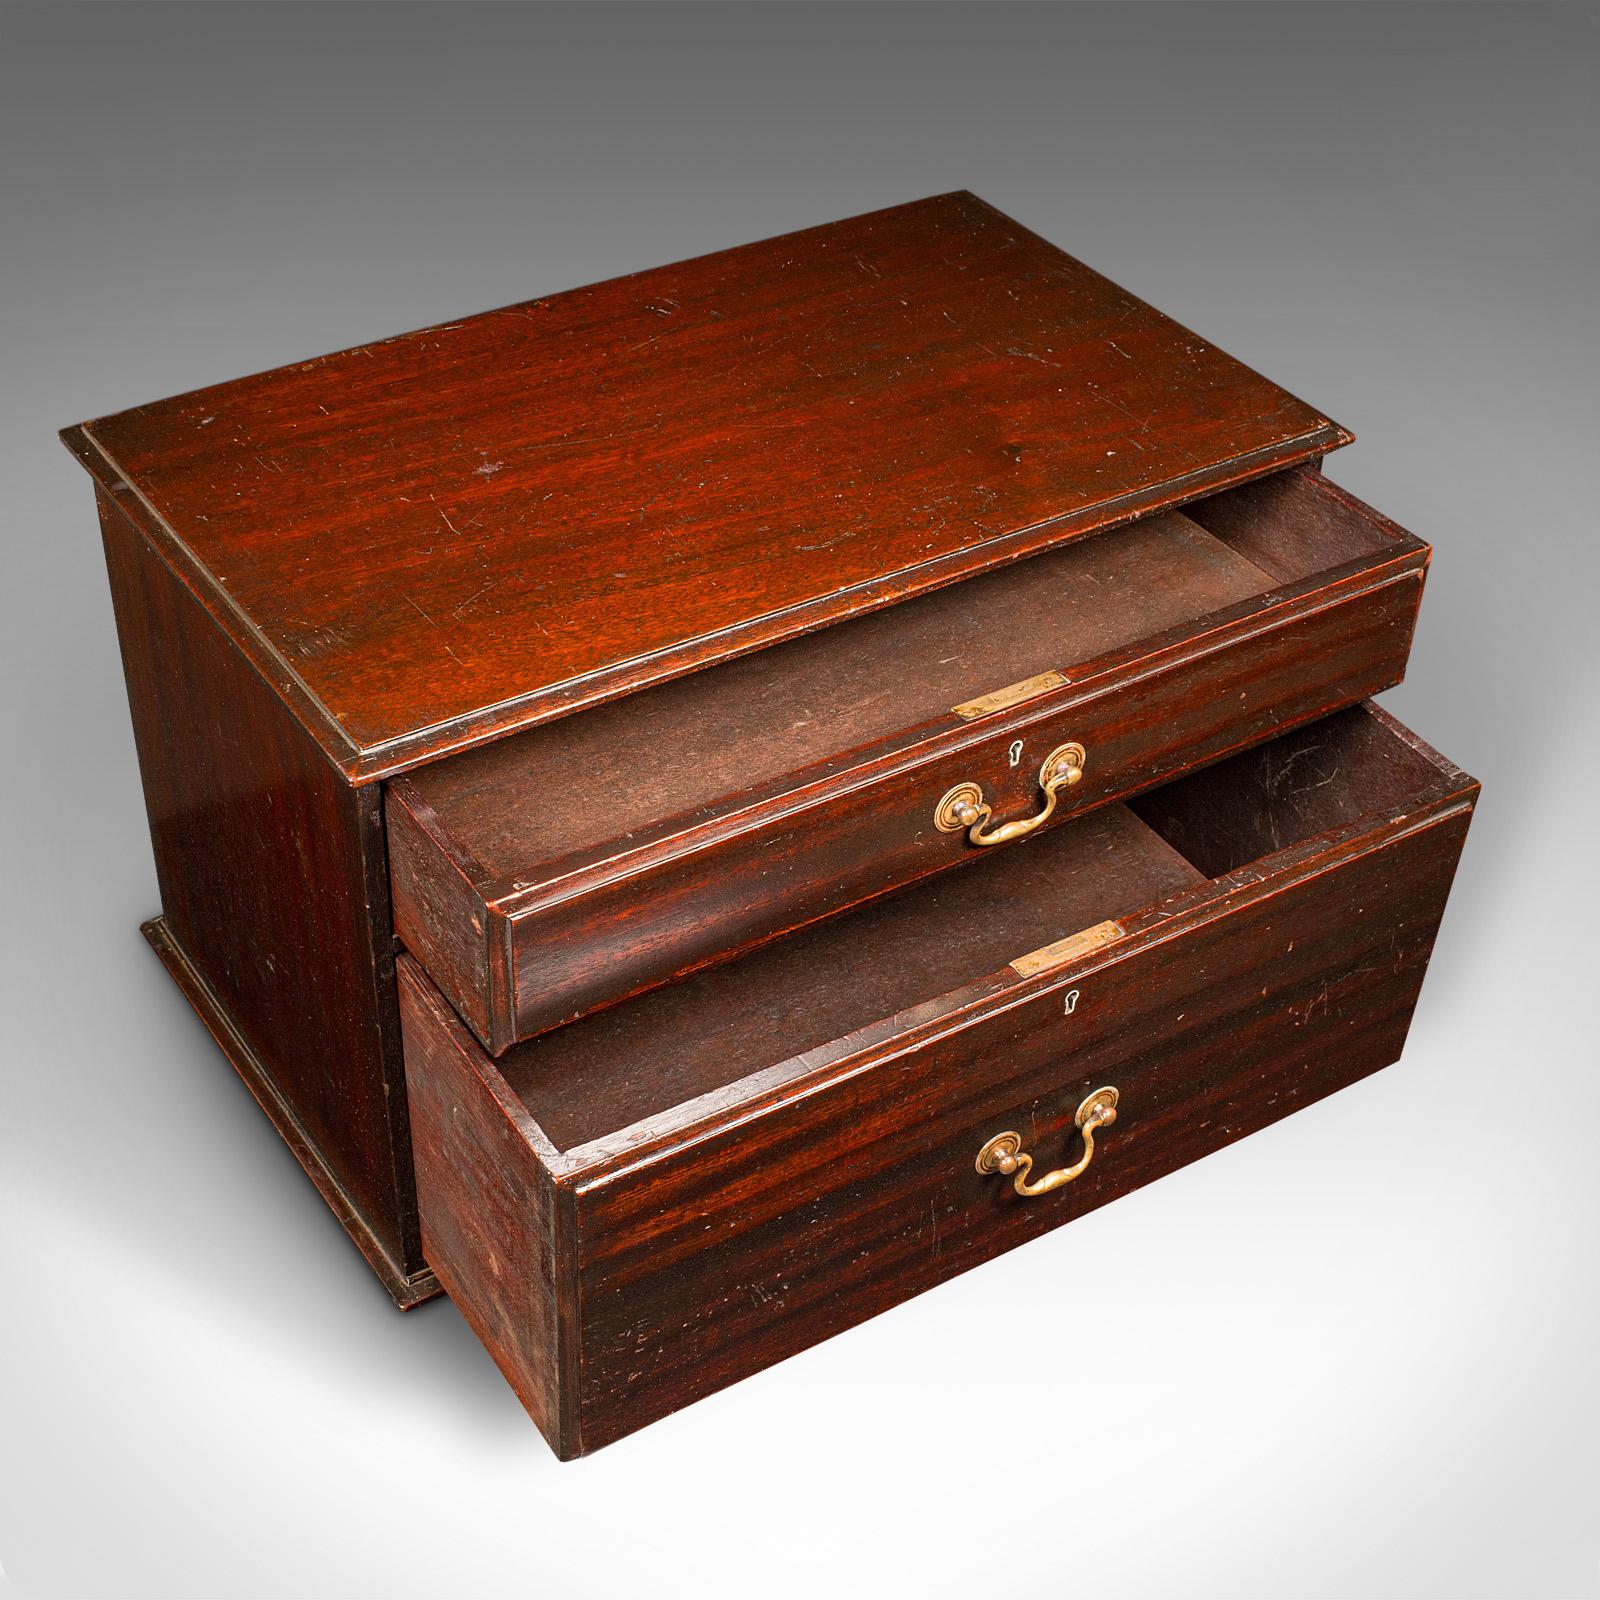 Wood Antique Watchmaker's Cabinet, English, Tabletop Work Chest, Victorian, C.1860 For Sale